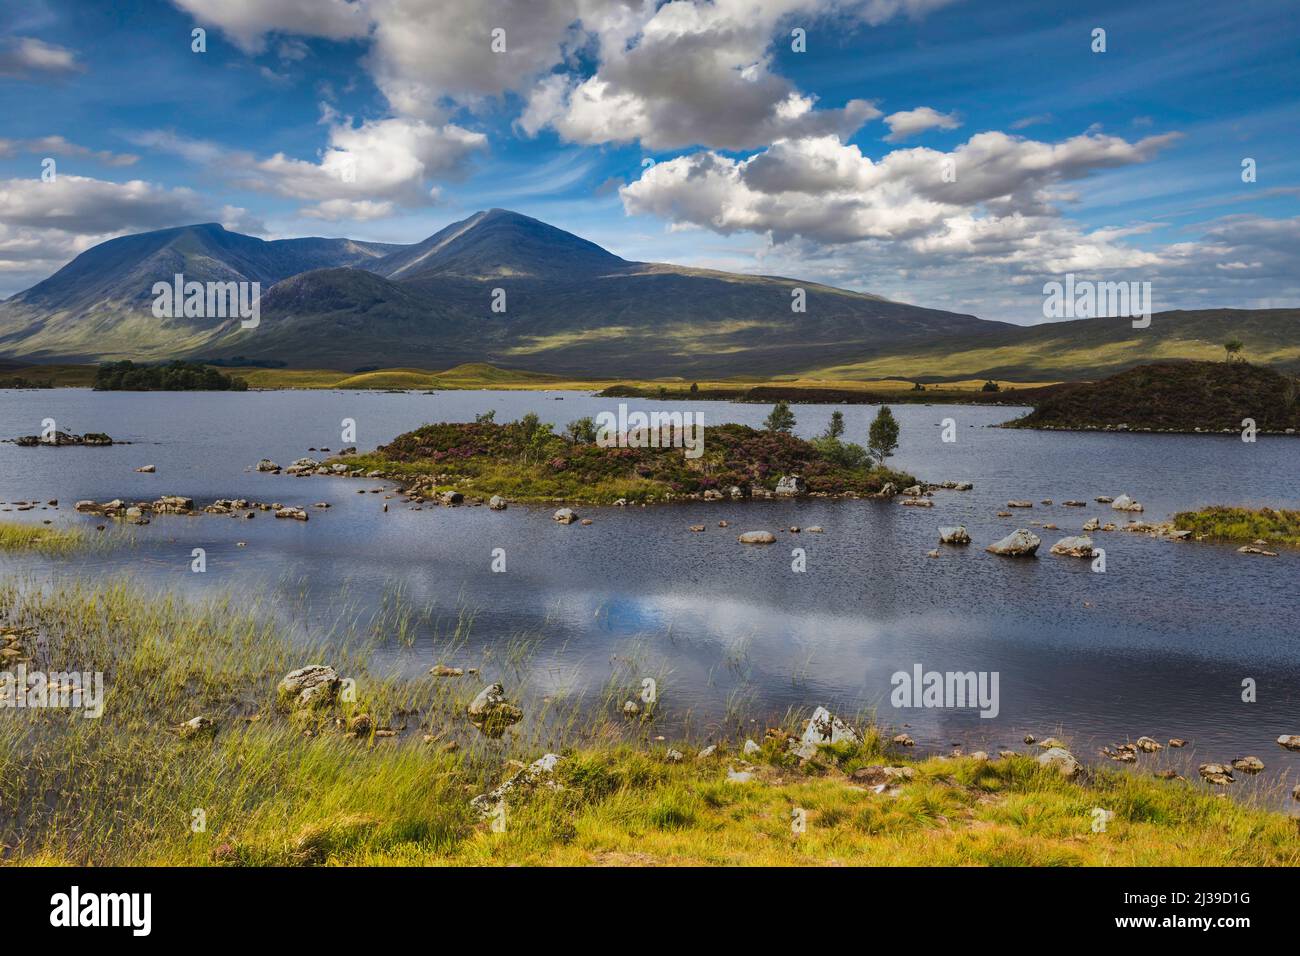 The lakes of Lochan na h-Achlaise on the vast peat bogs of Rannoch Moor in the remote West Highlands of Scotland. Stock Photo